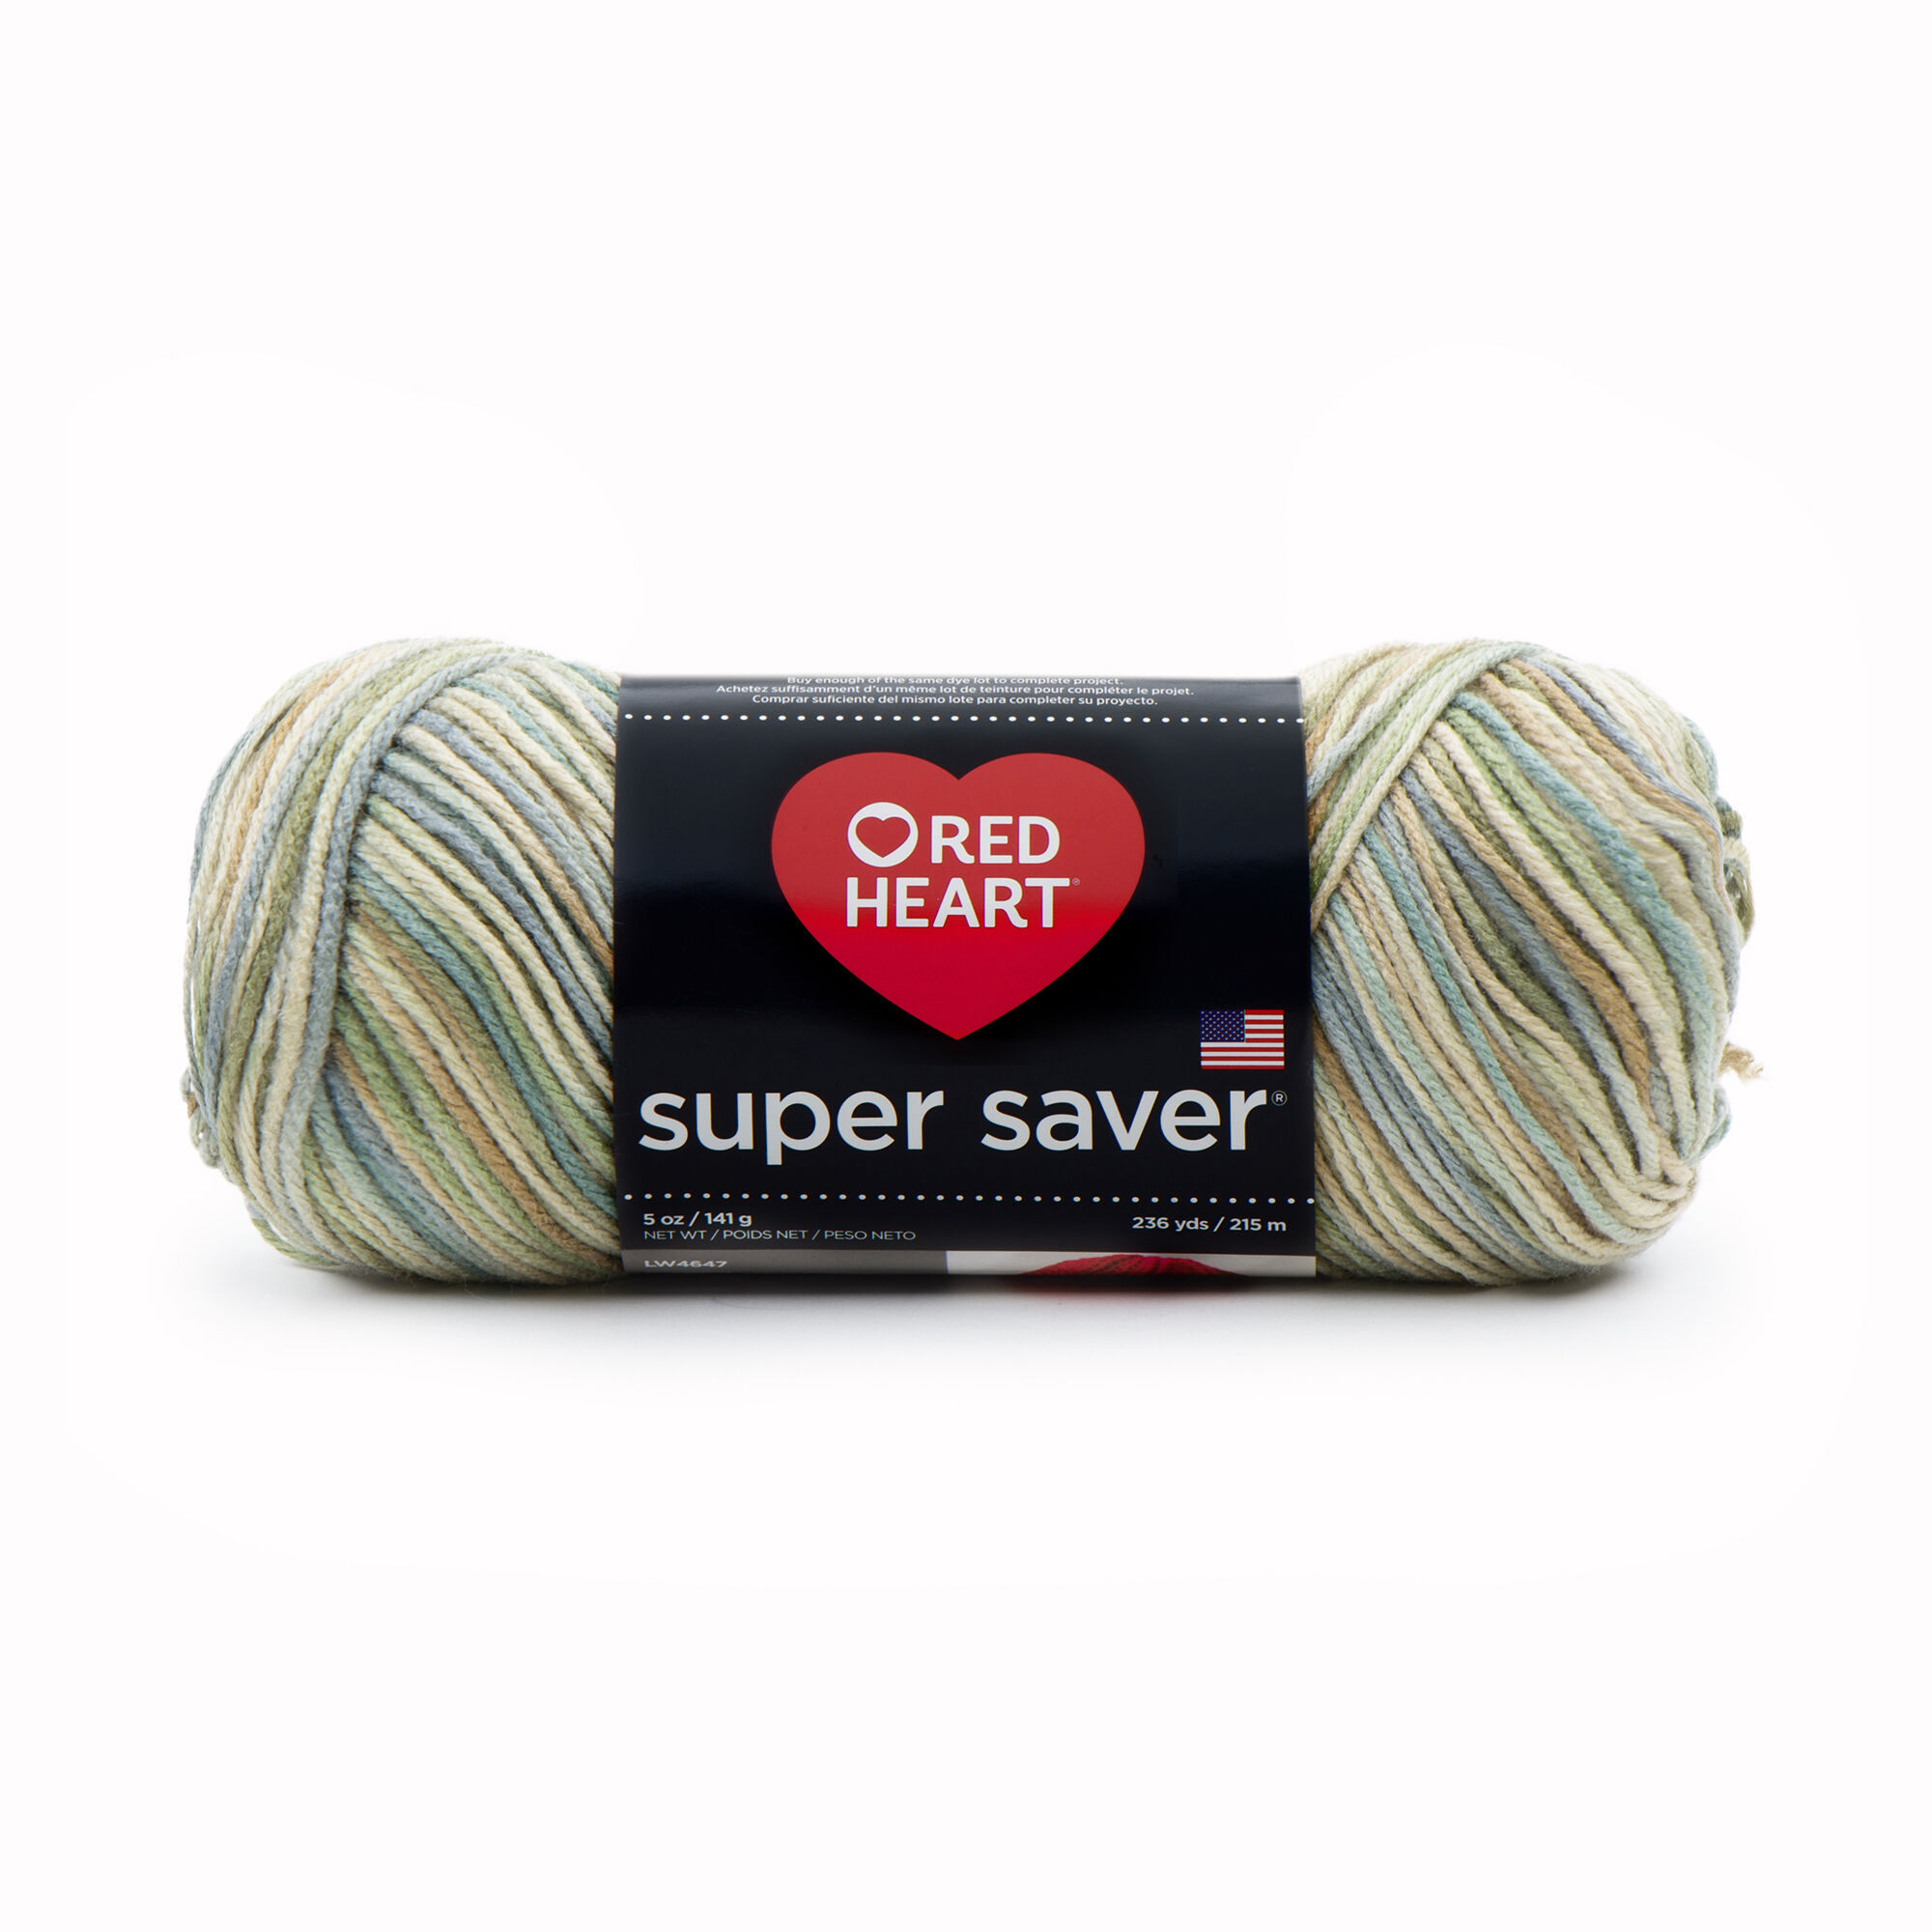 Red Heart Super Saver Size 4 Acrylic Aspen Yarn, 236 yd - image 1 of 7